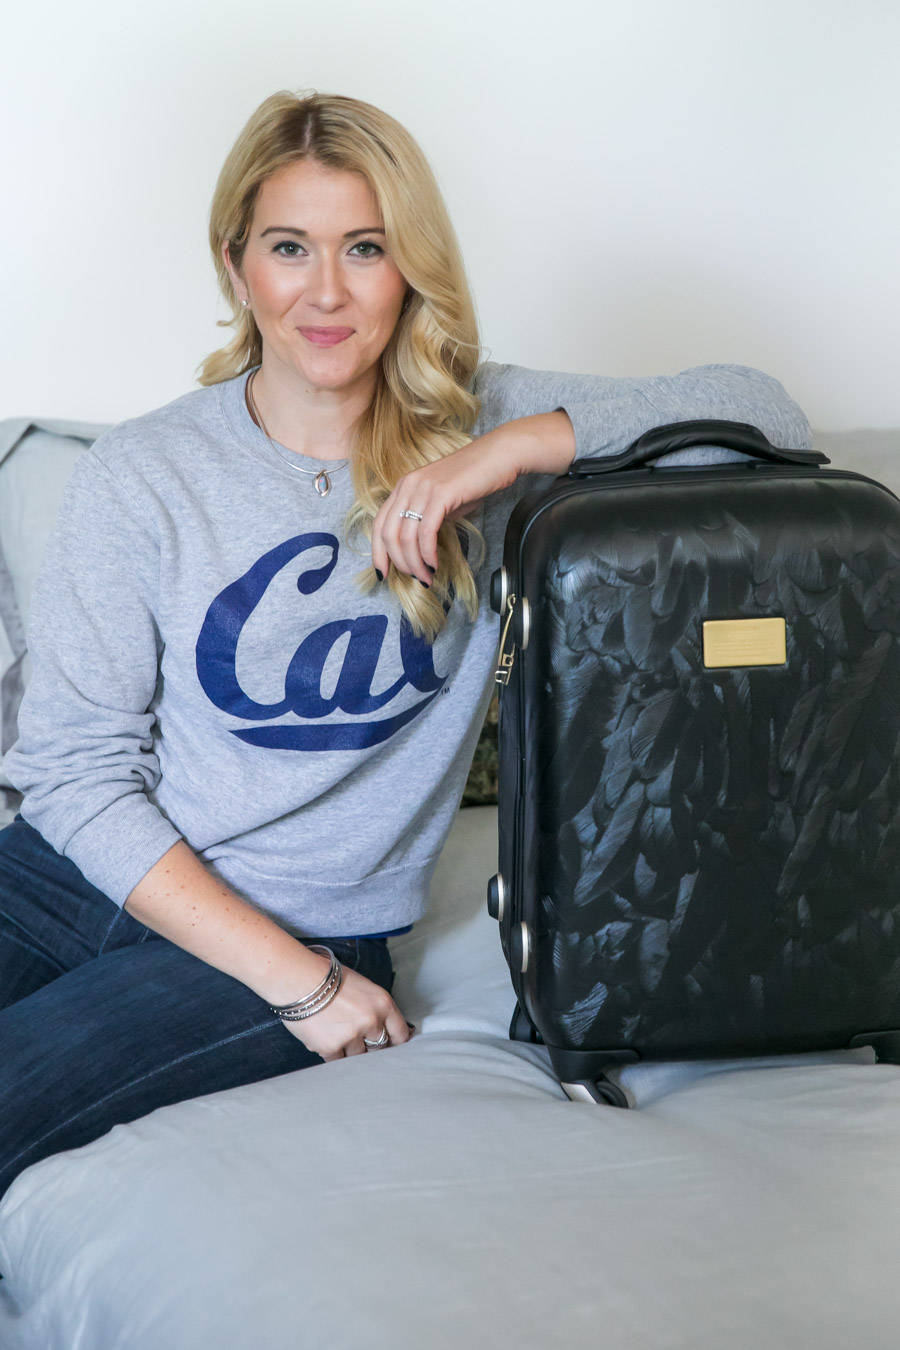 Carry On Travel Packing Tips - How to Pack a Carry On